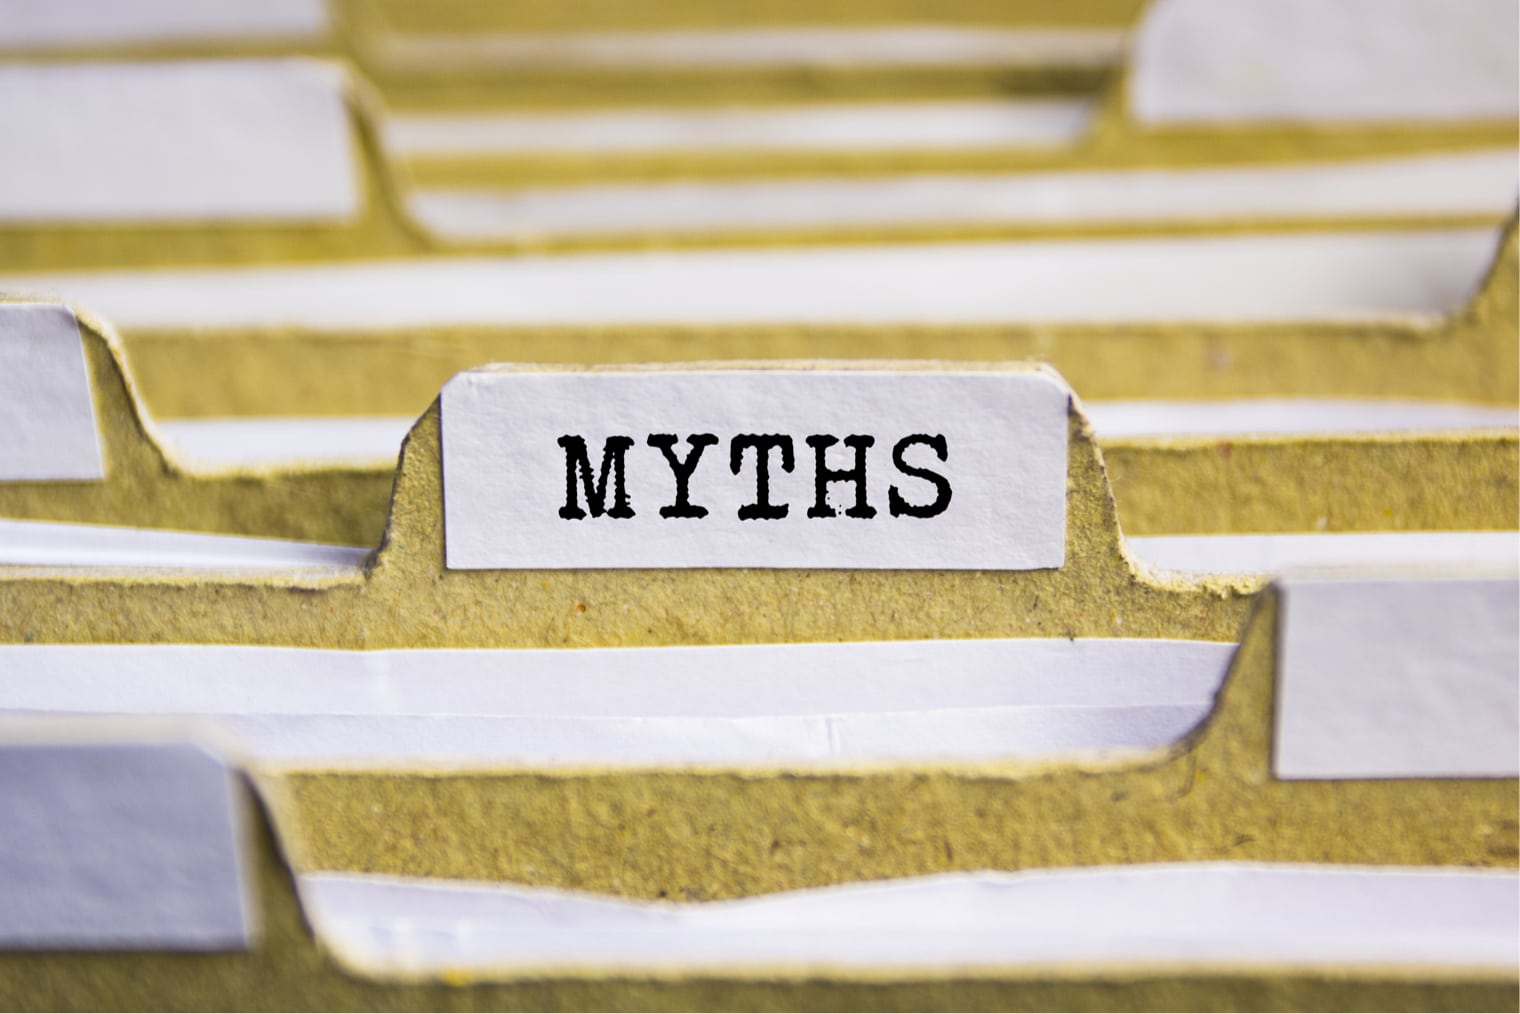 photo of file marked myths